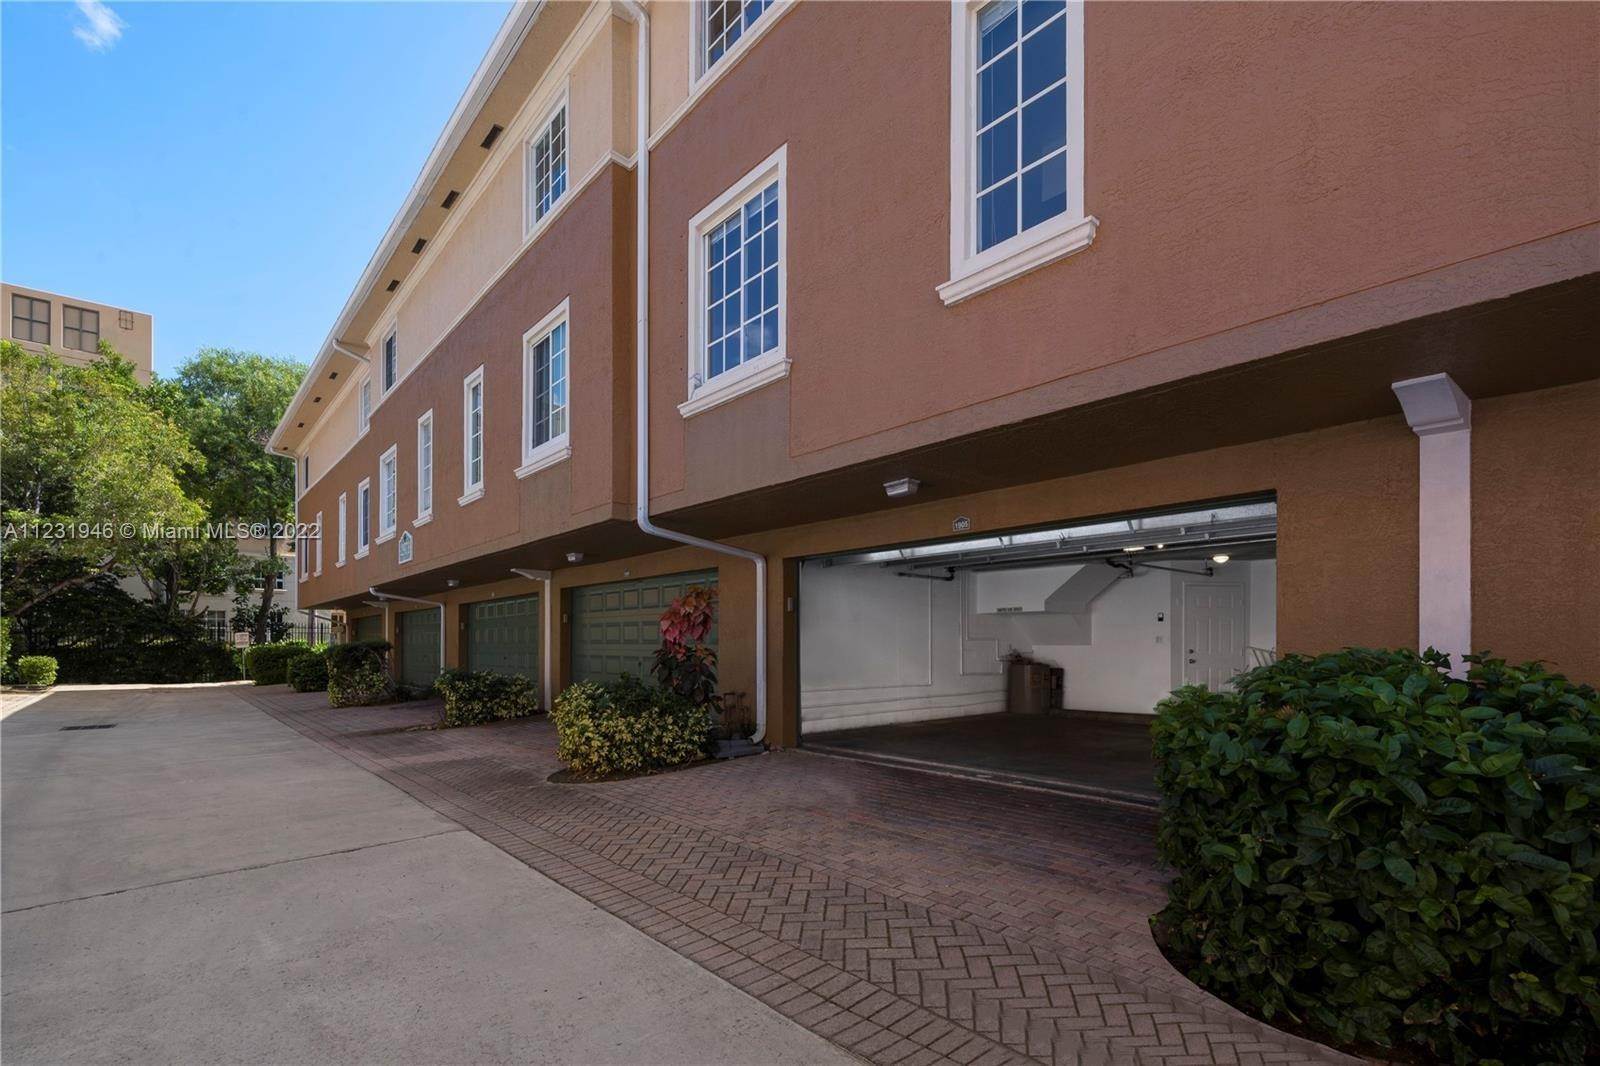 37. Townhouse for Sale at Aventura, FL 33180